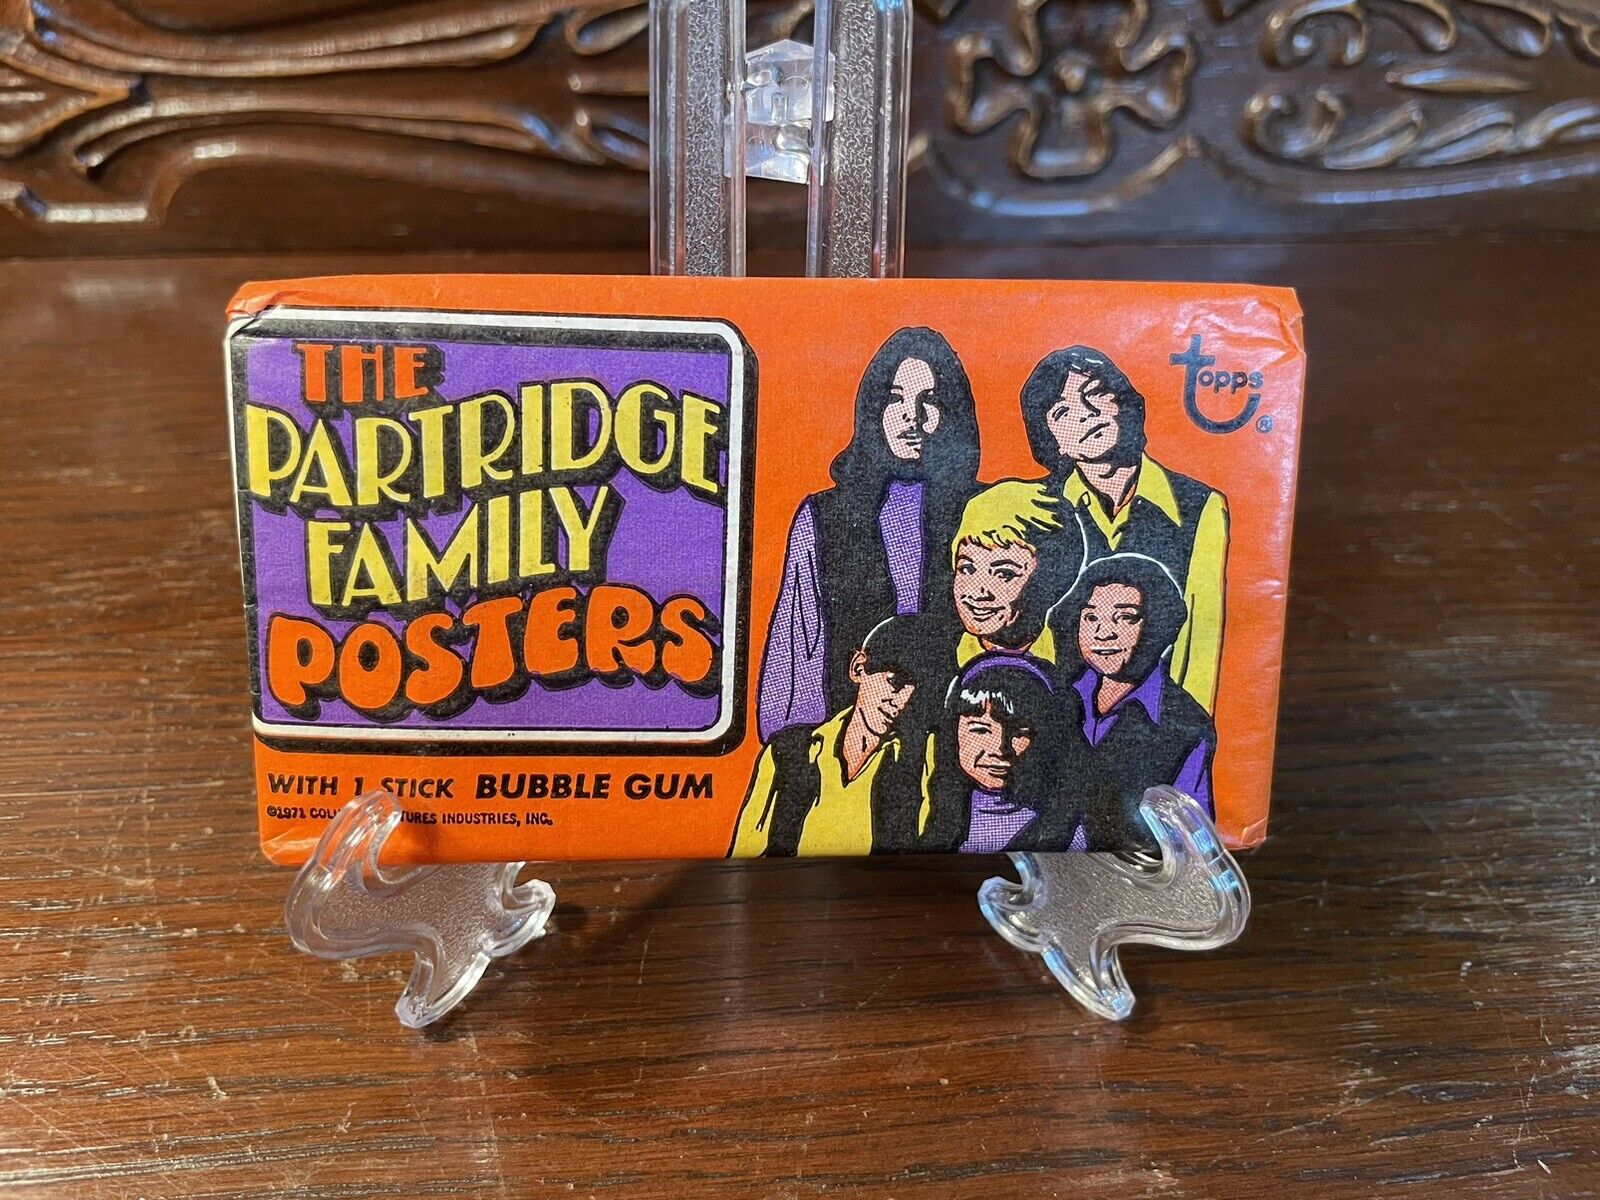 1971 Topps The Partridge Family Posters Sealed Wax Pack